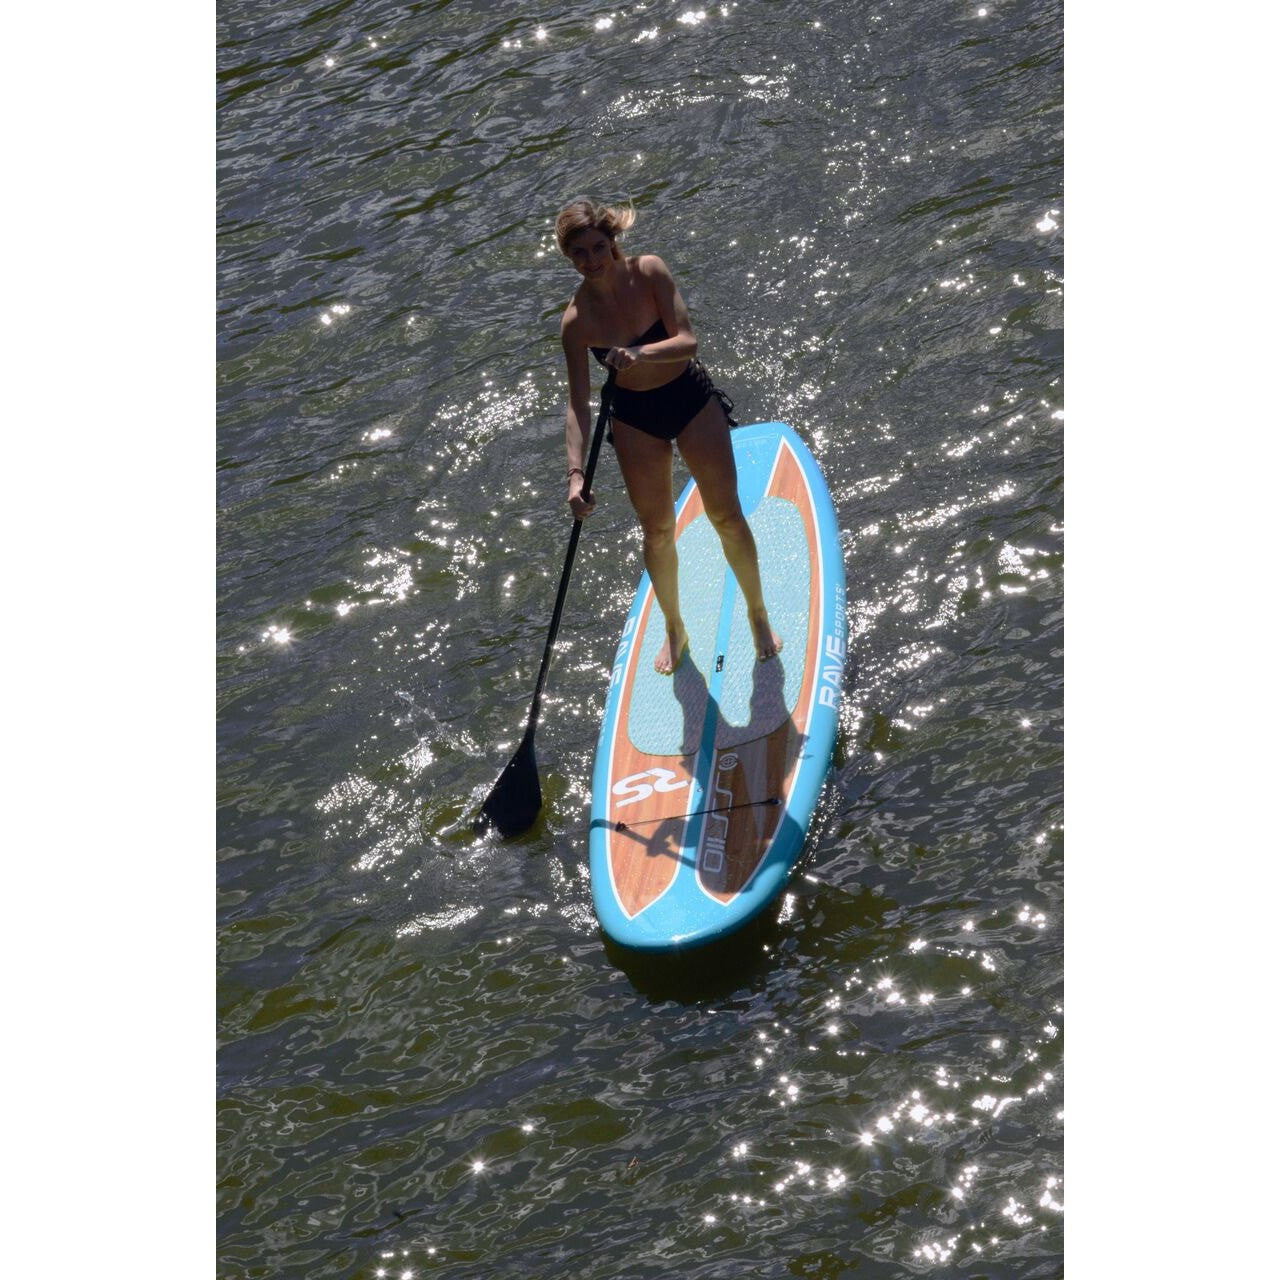 Rave Sports Shoreline Series SS110 Stand Up Paddle Board SUP - 02728